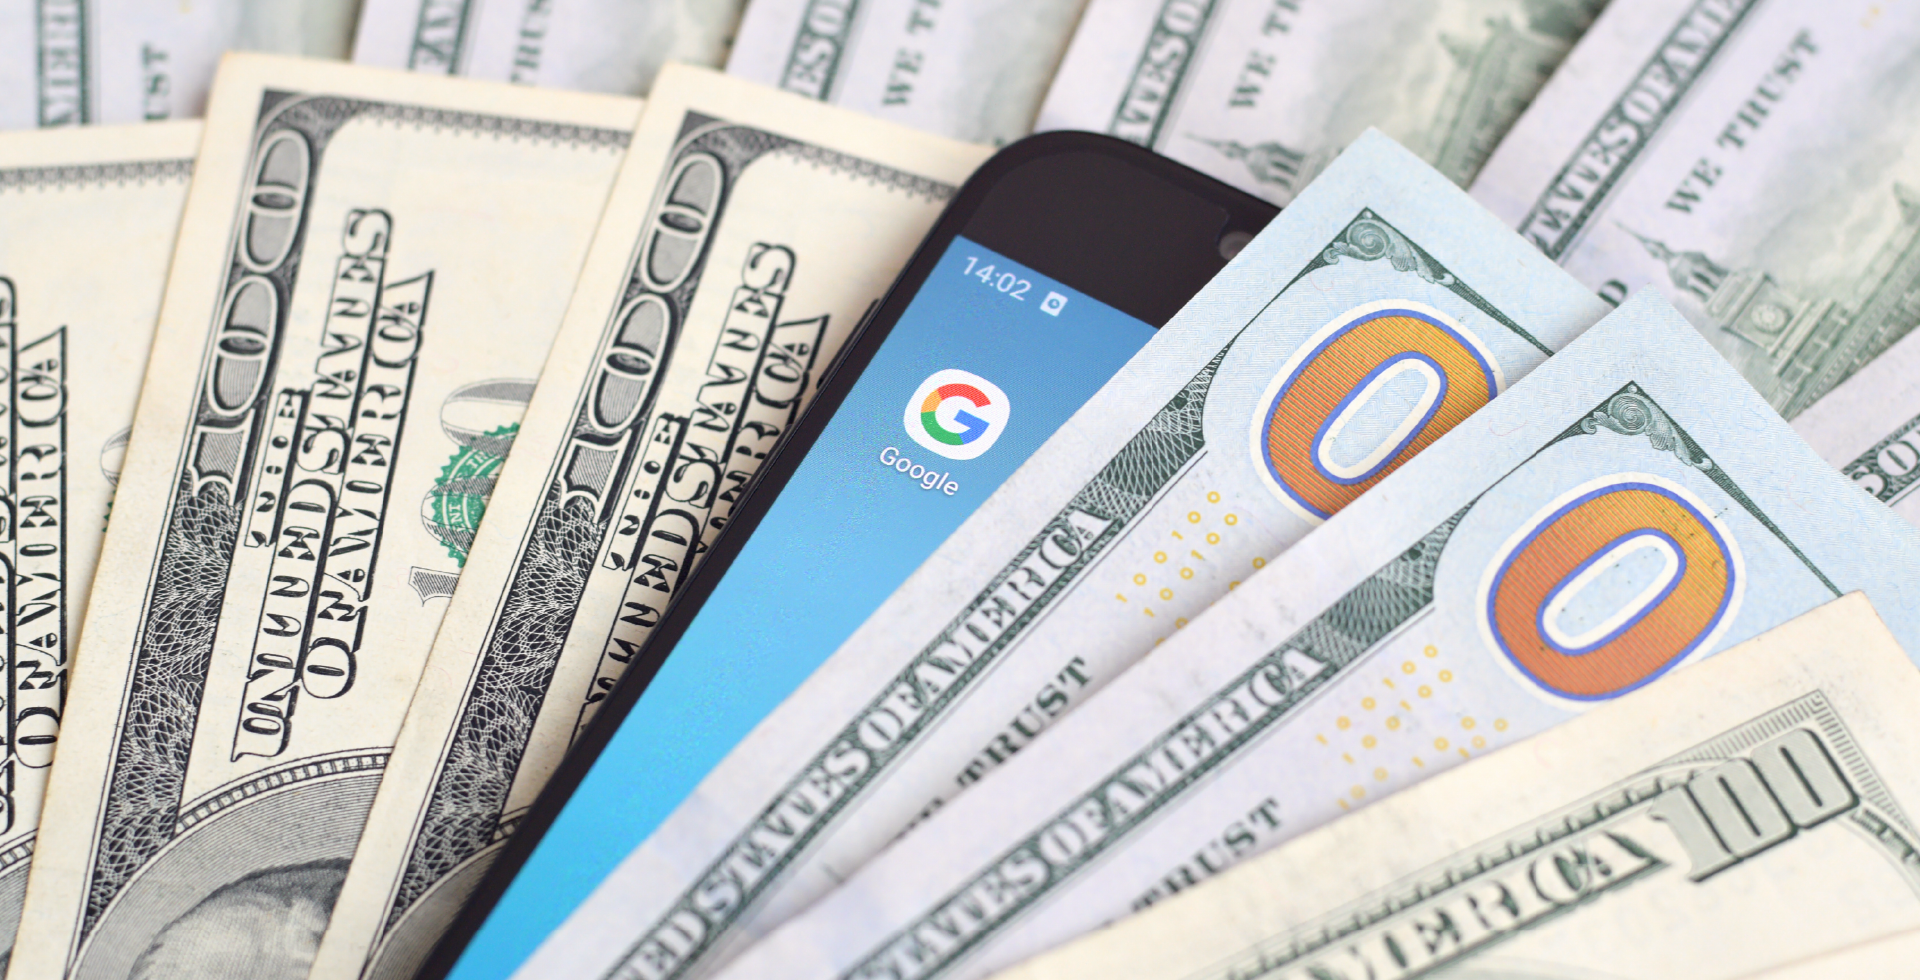 there are a lot of cash moneys and also a phone with google ads app on the screen